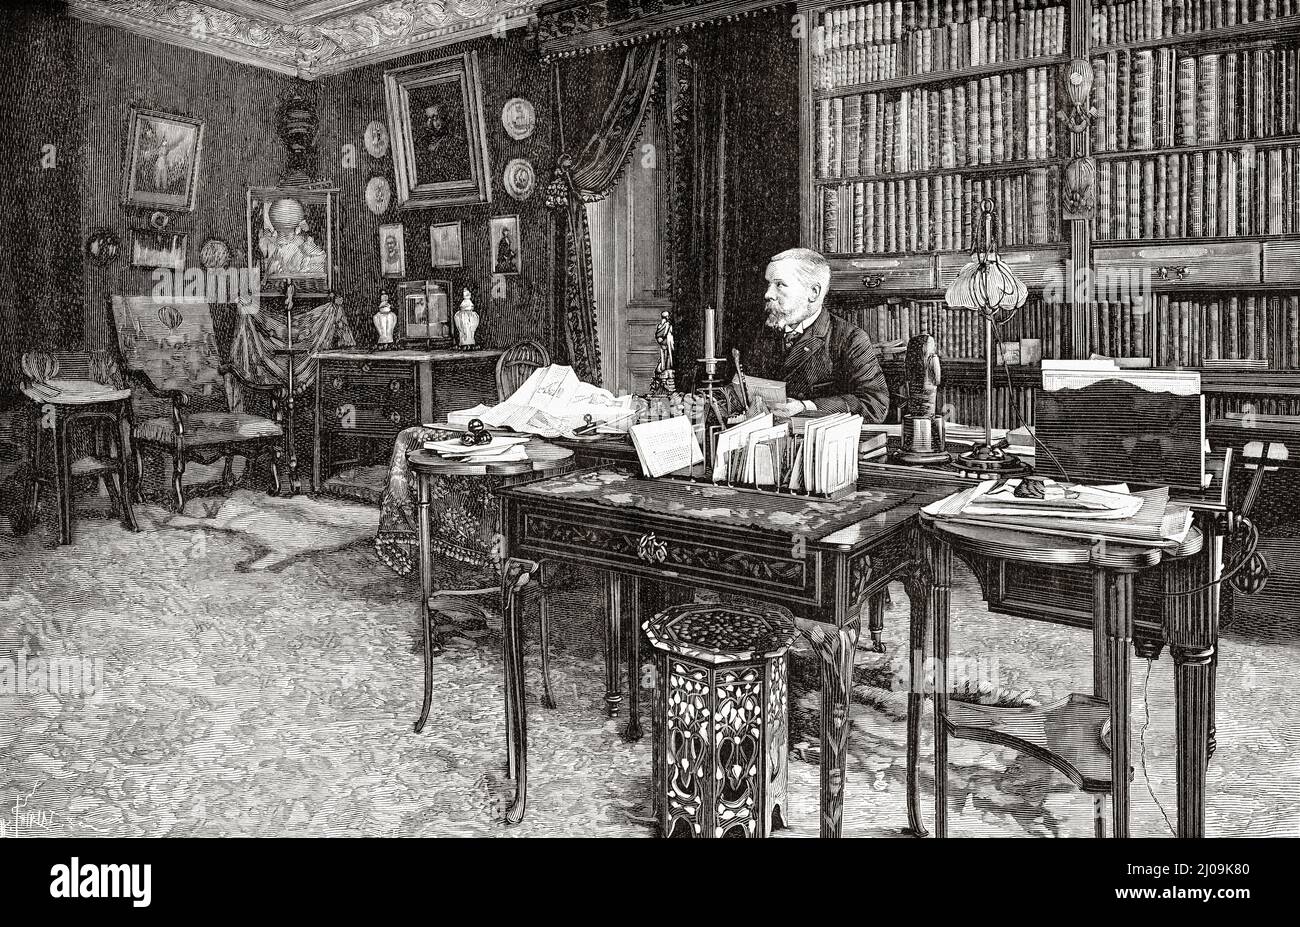 Gaston Tissandier in his study. France, Europe. Old 19th century engraved illustration from La Nature 1899 Stock Photo